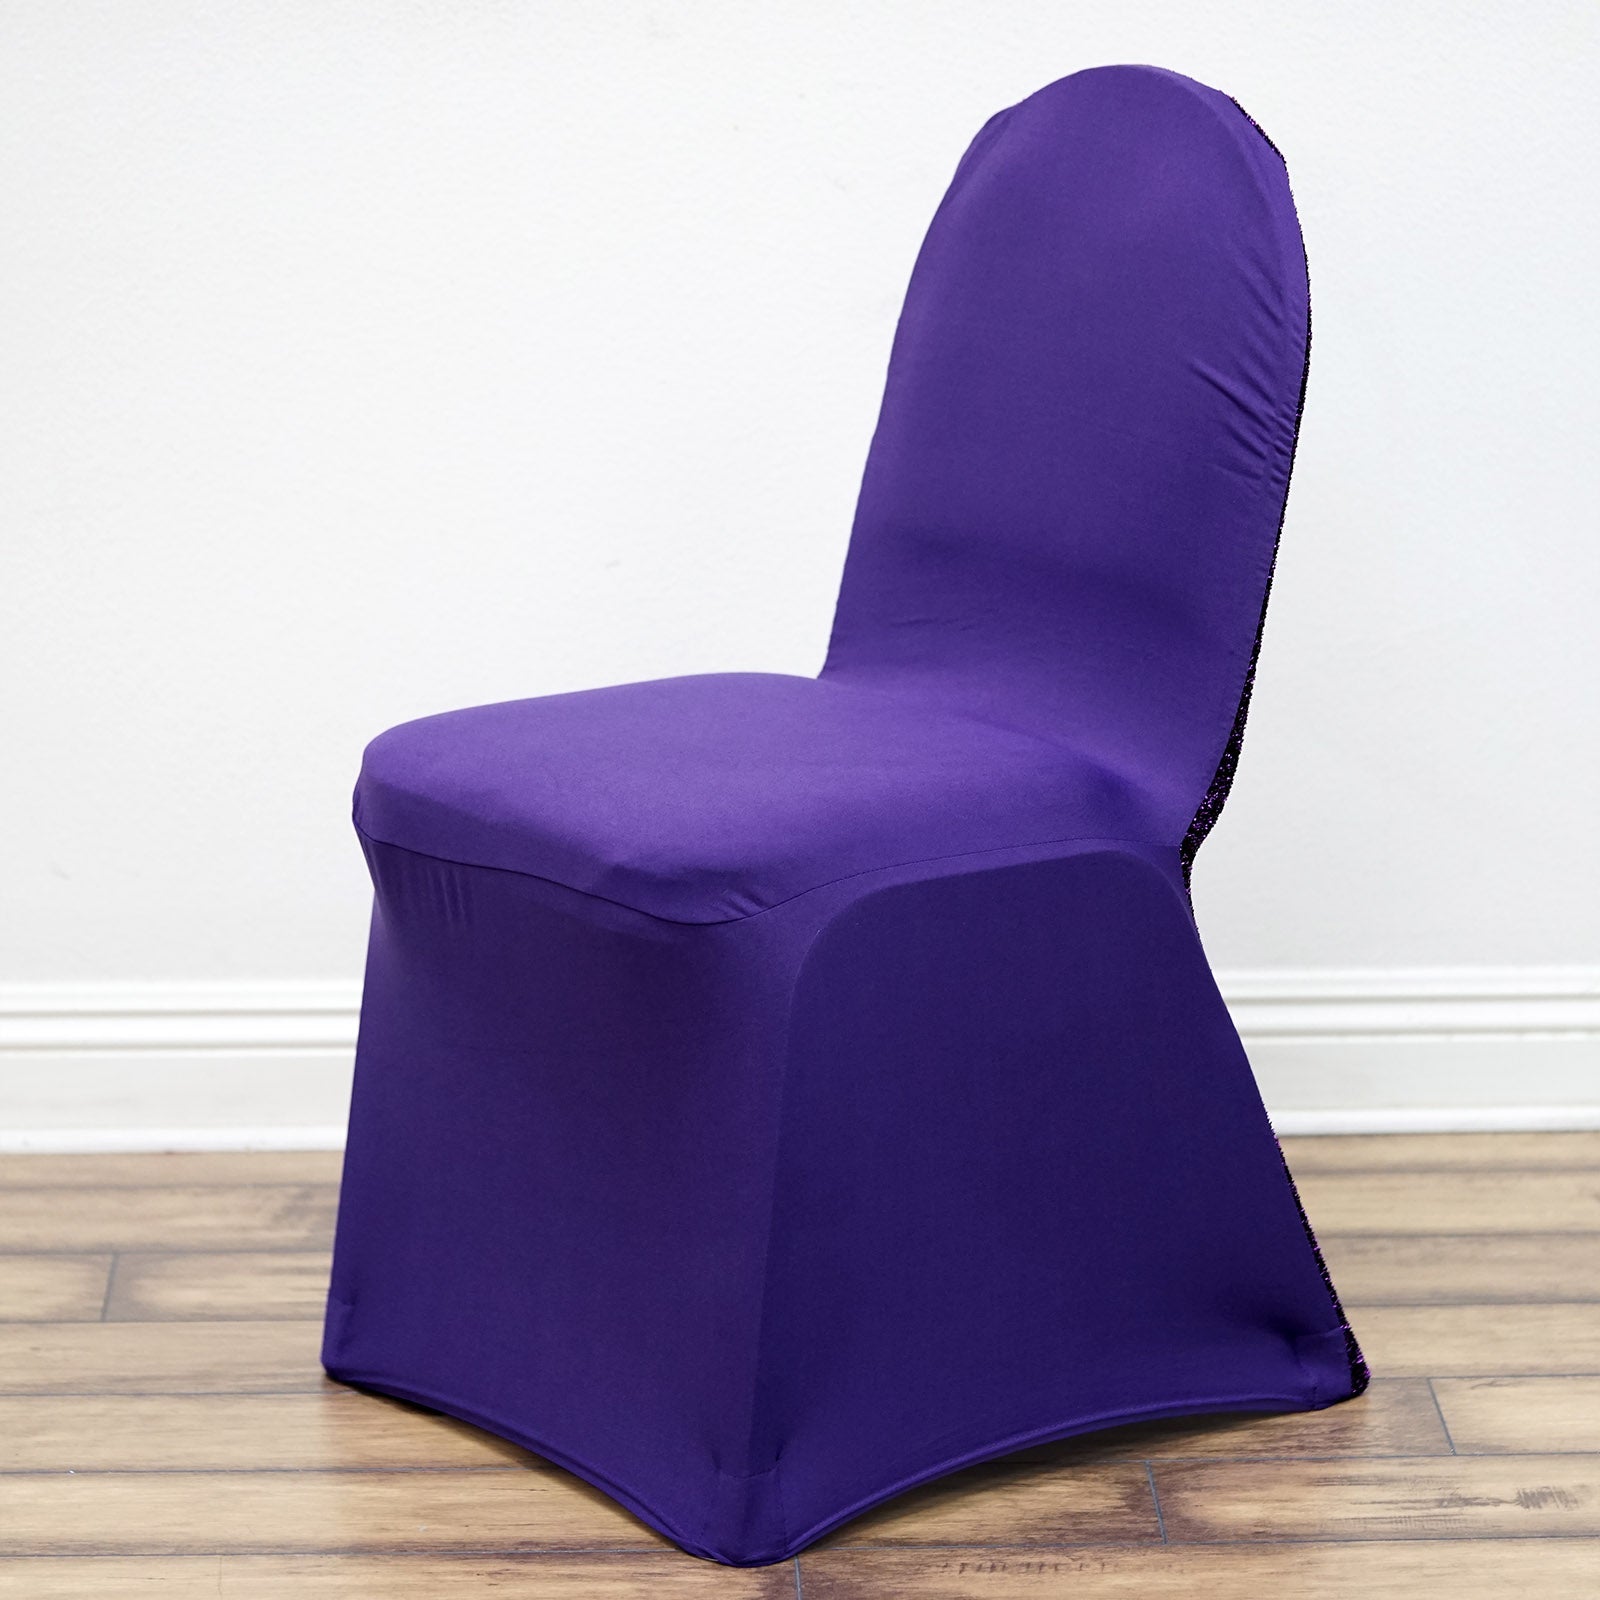 Purple Spandex Stretch Banquet Chair Cover With Metallic ...